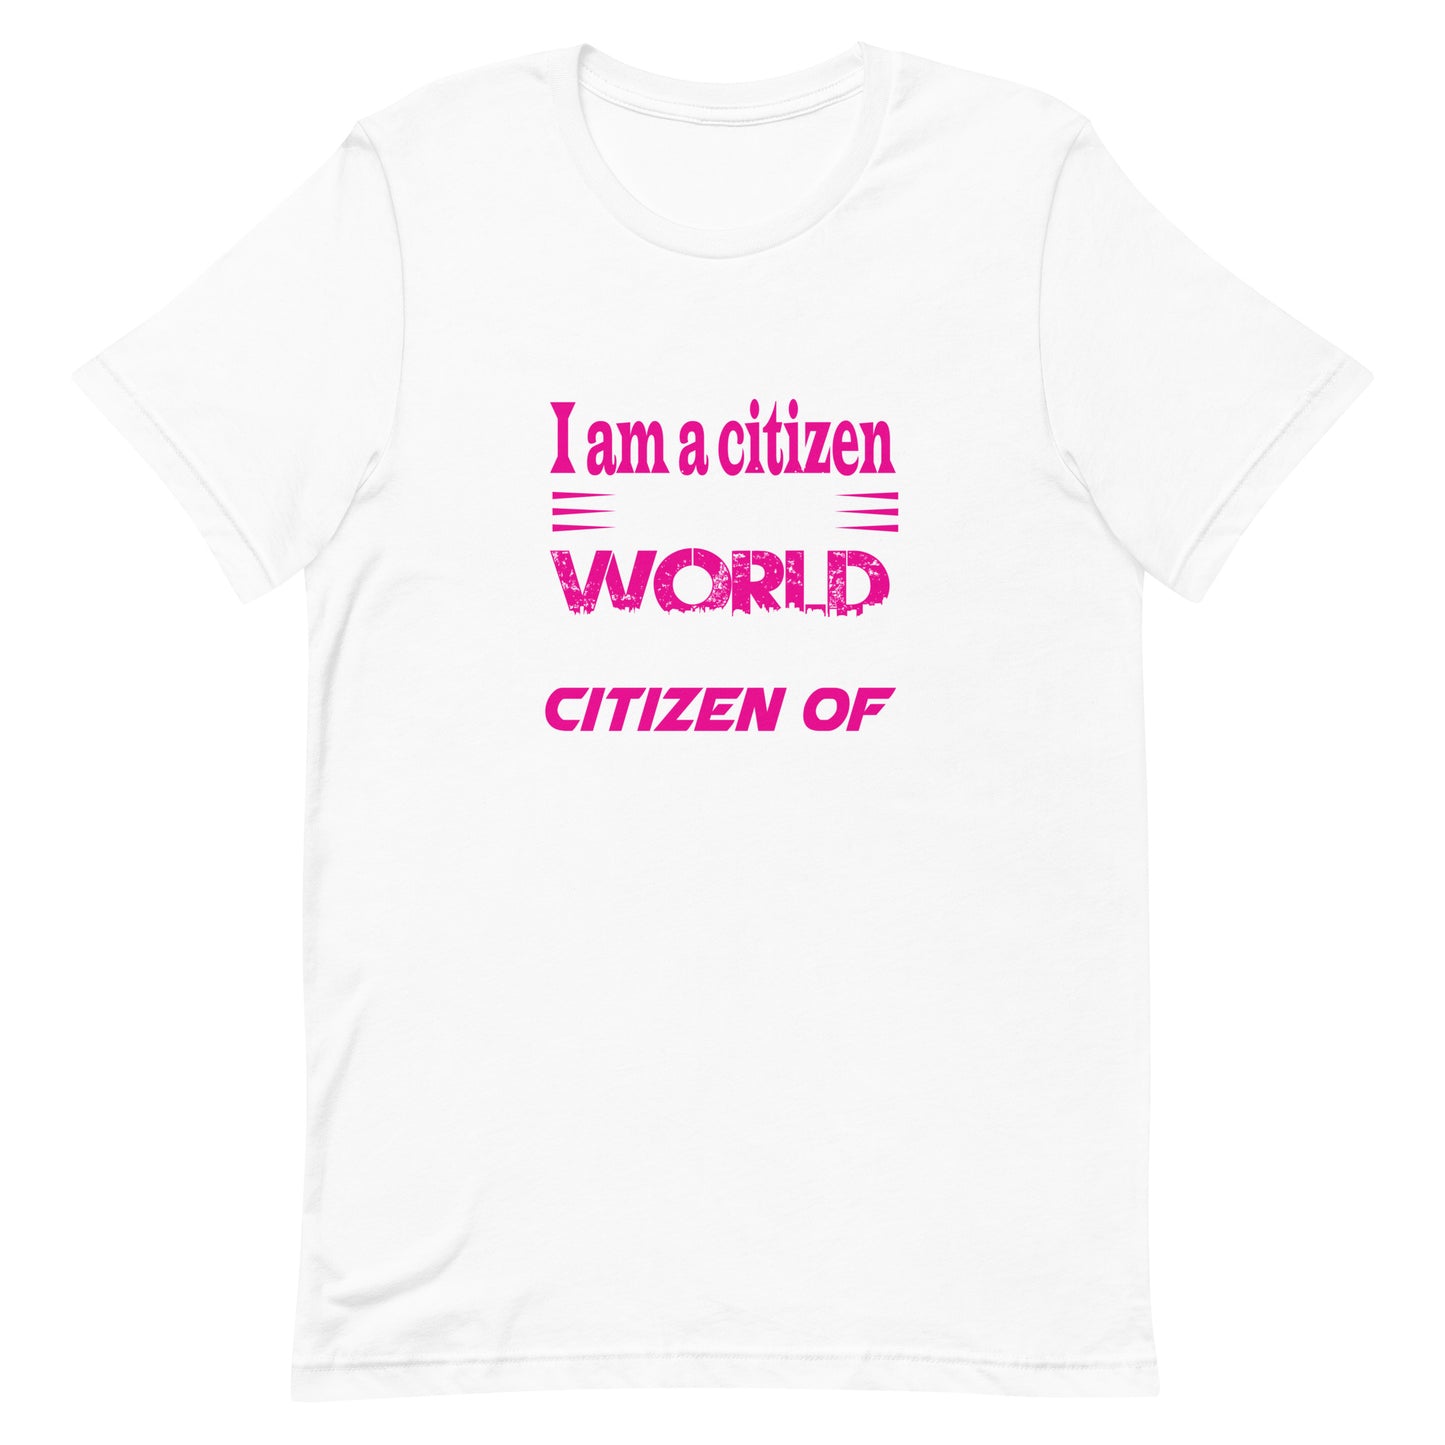 I am a citizen of the world and also a citizen of Ukraine | Unisex t-shirt